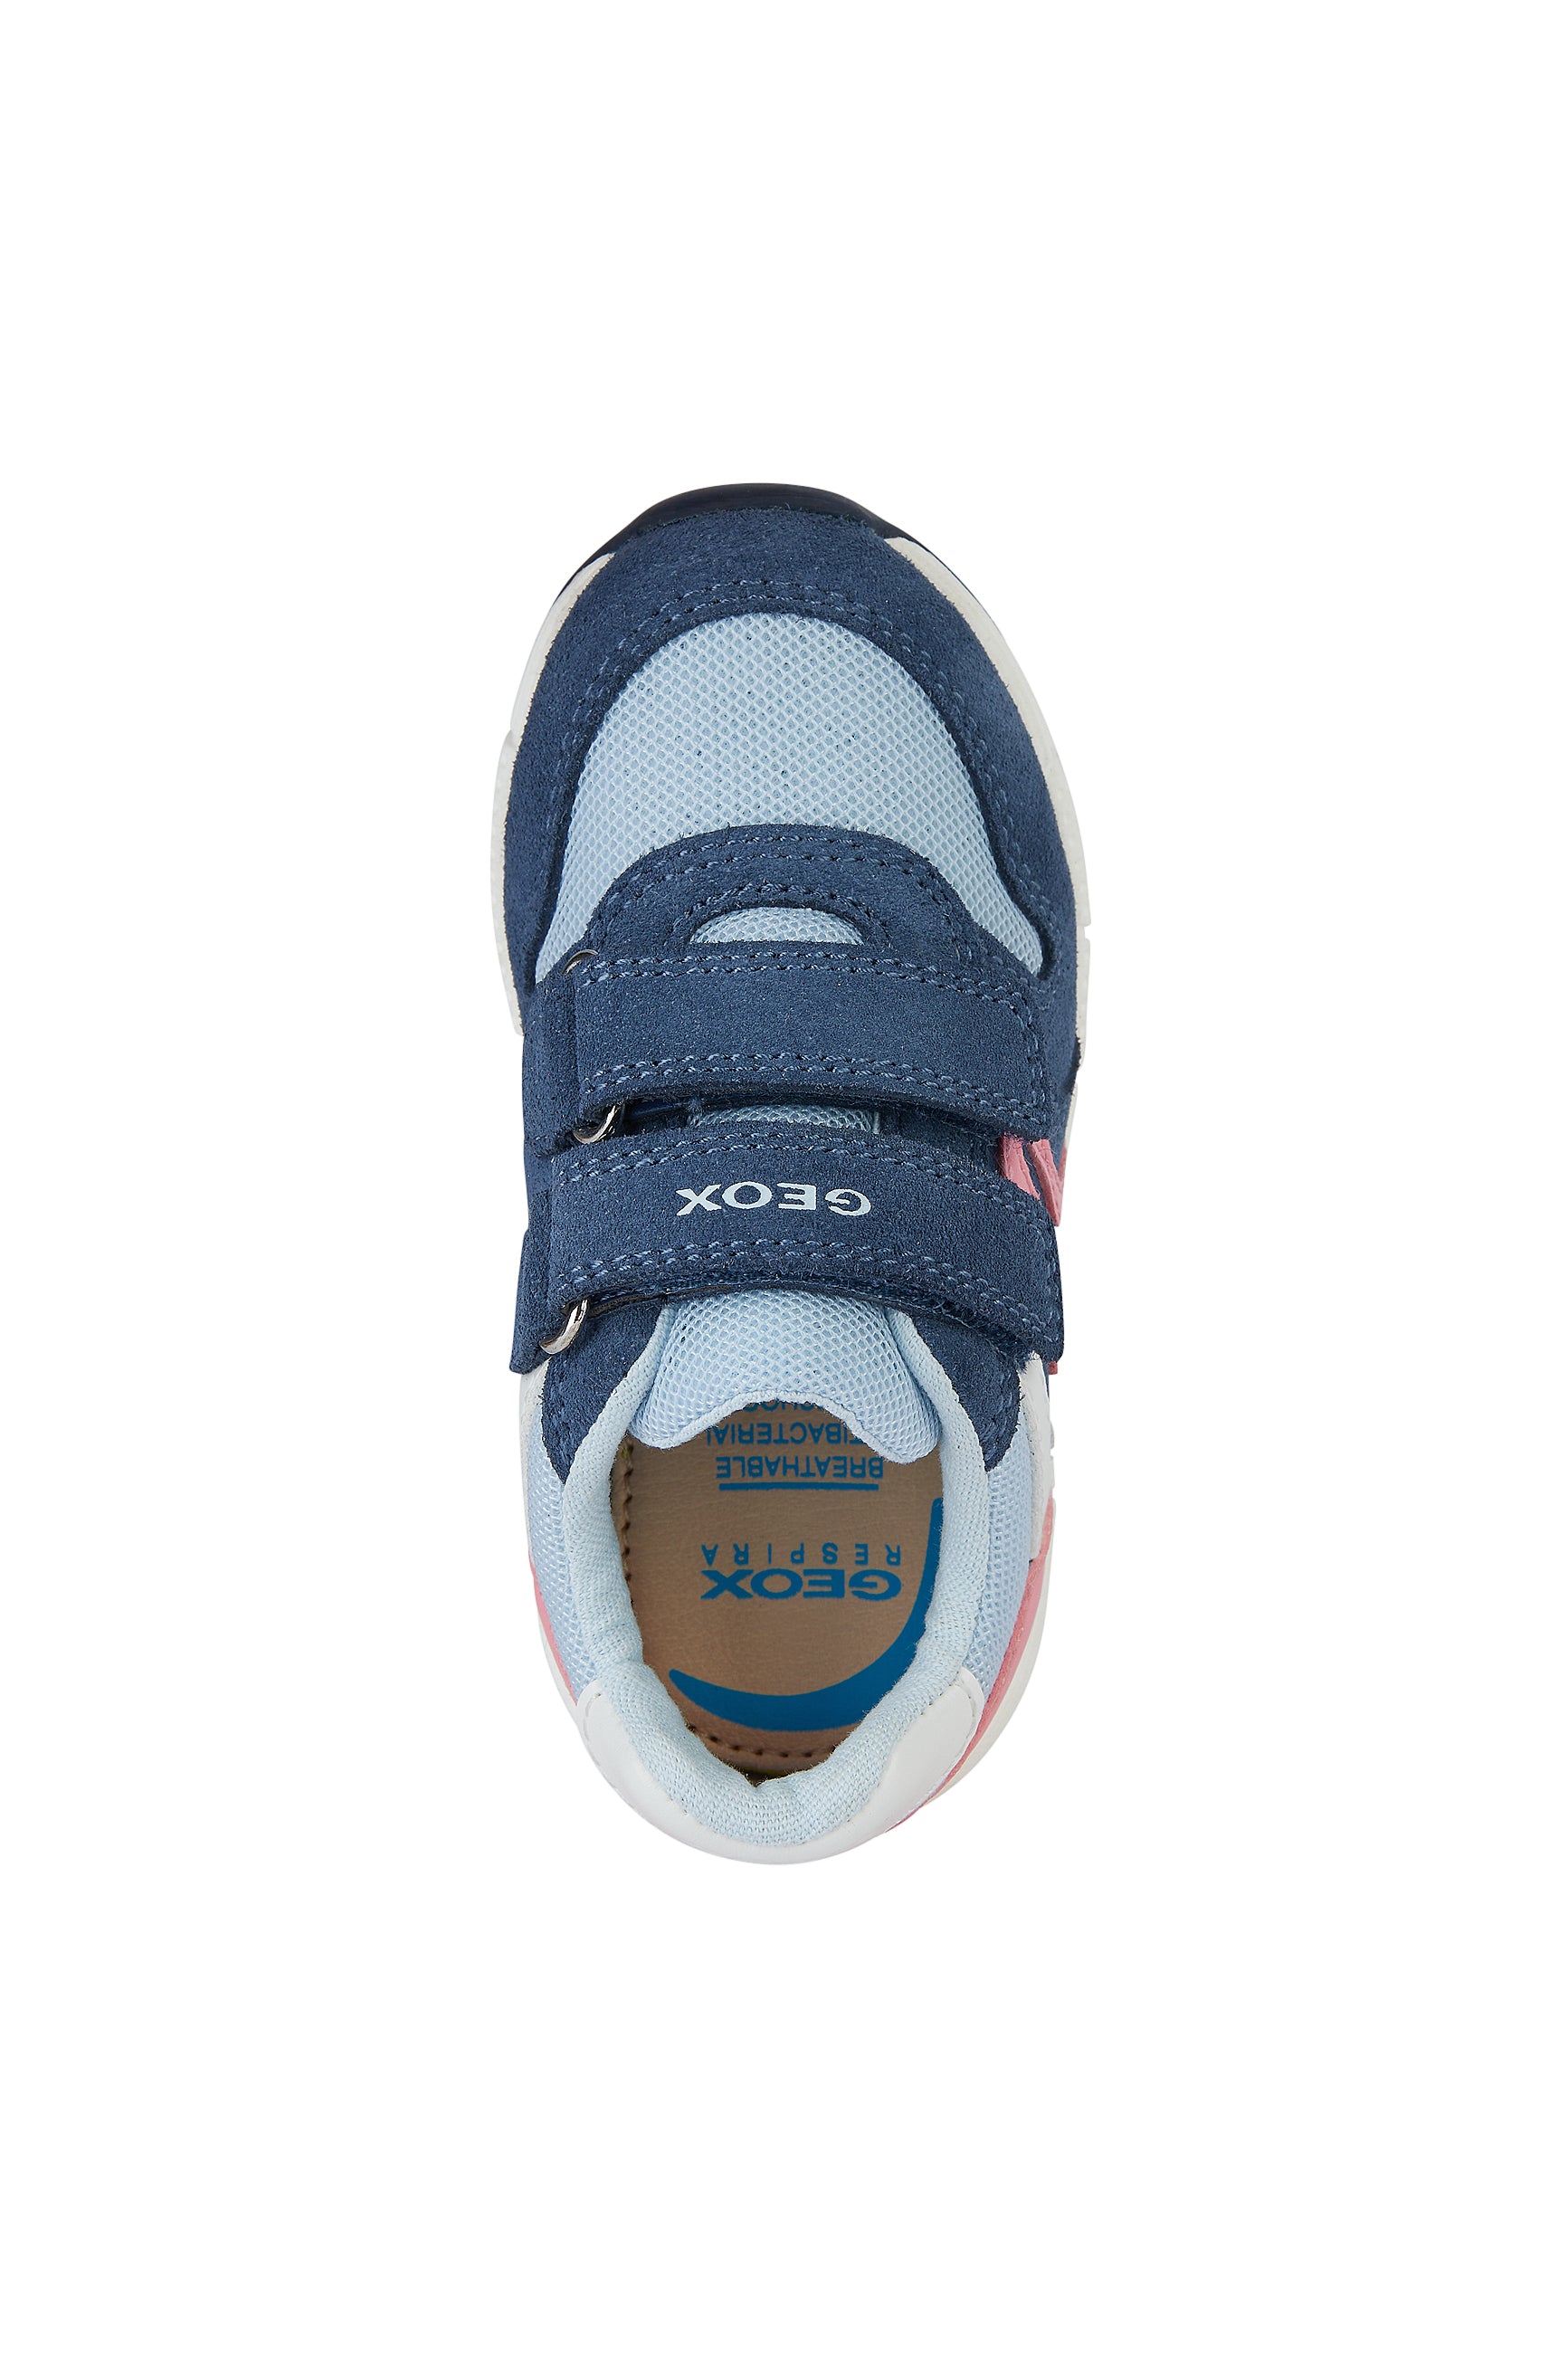 A girls trainer by Geox, style B Alben, in blue, pink and white with double velcro fastening. View from above.